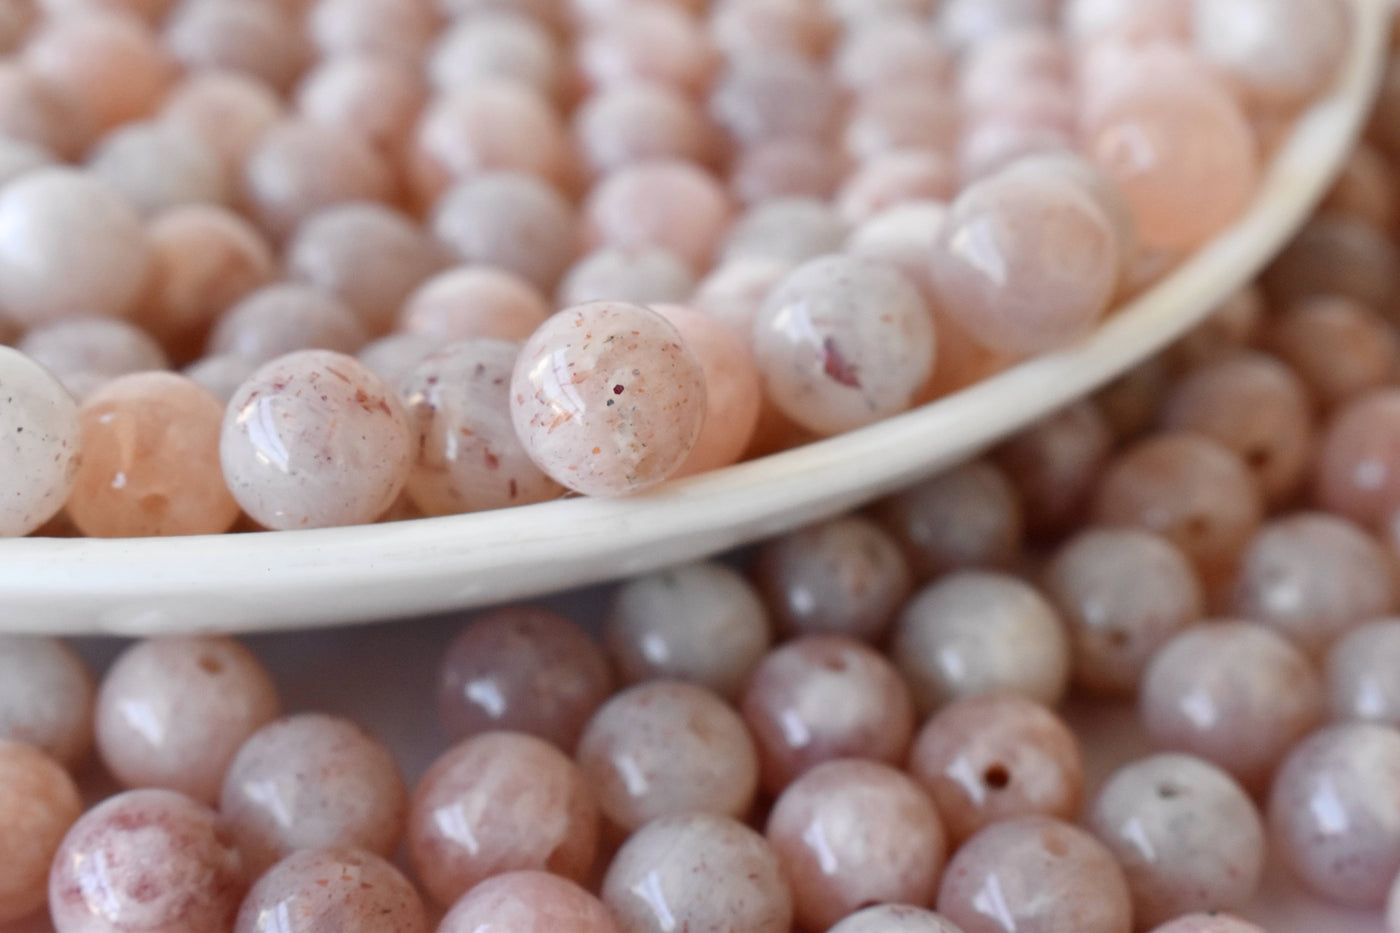 Sunstone Beads, Natural Round Crystal Beads 6mm to 10mm